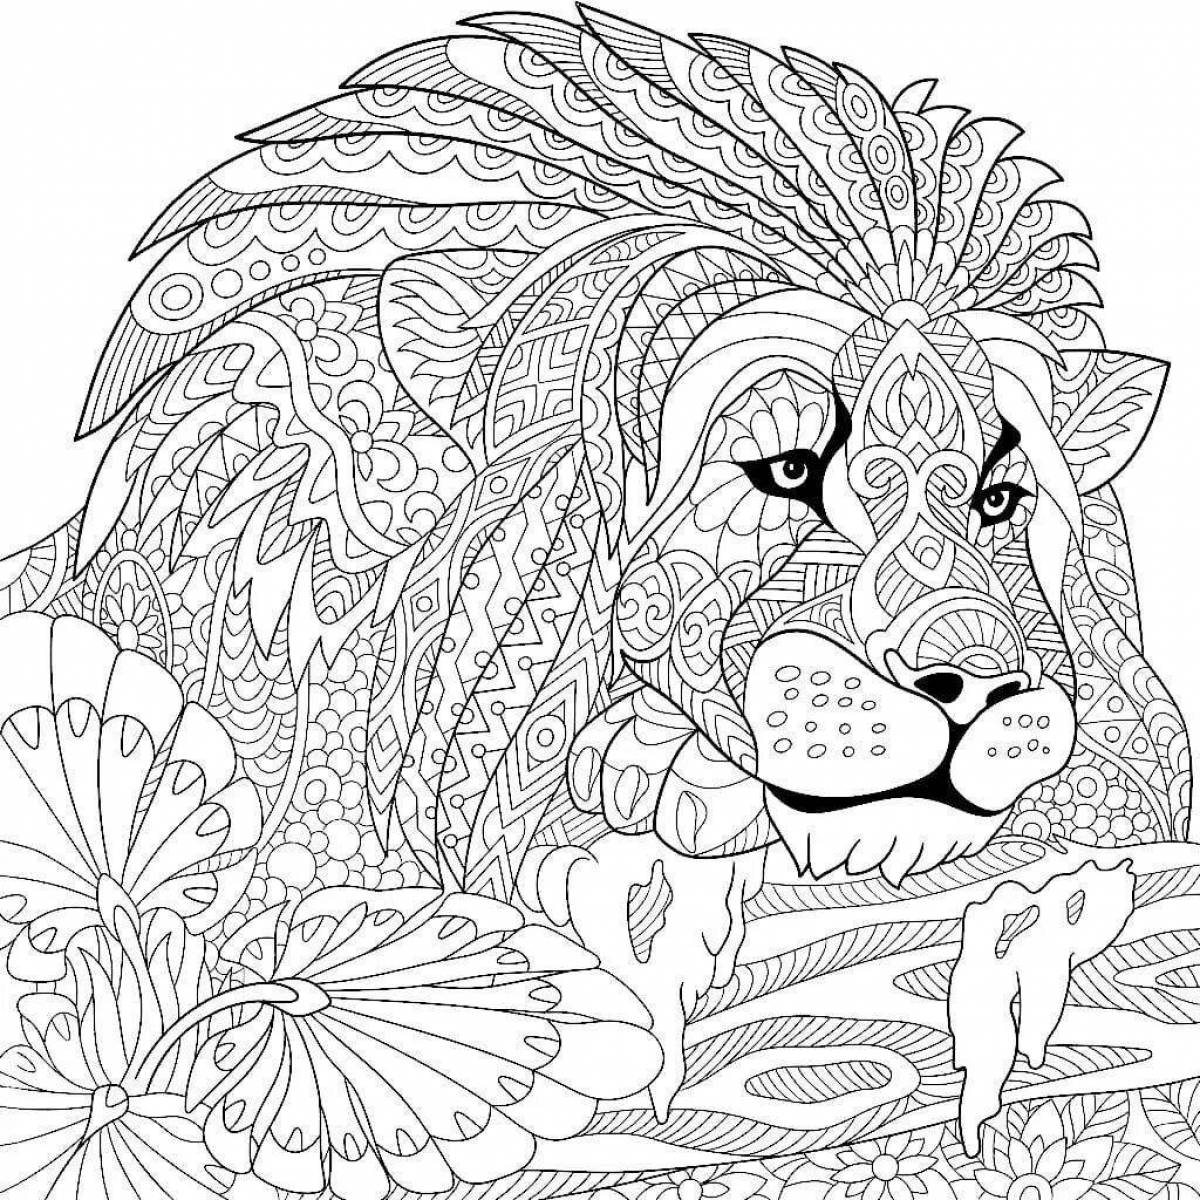 Adorable coloring book for girls 12 years old animals